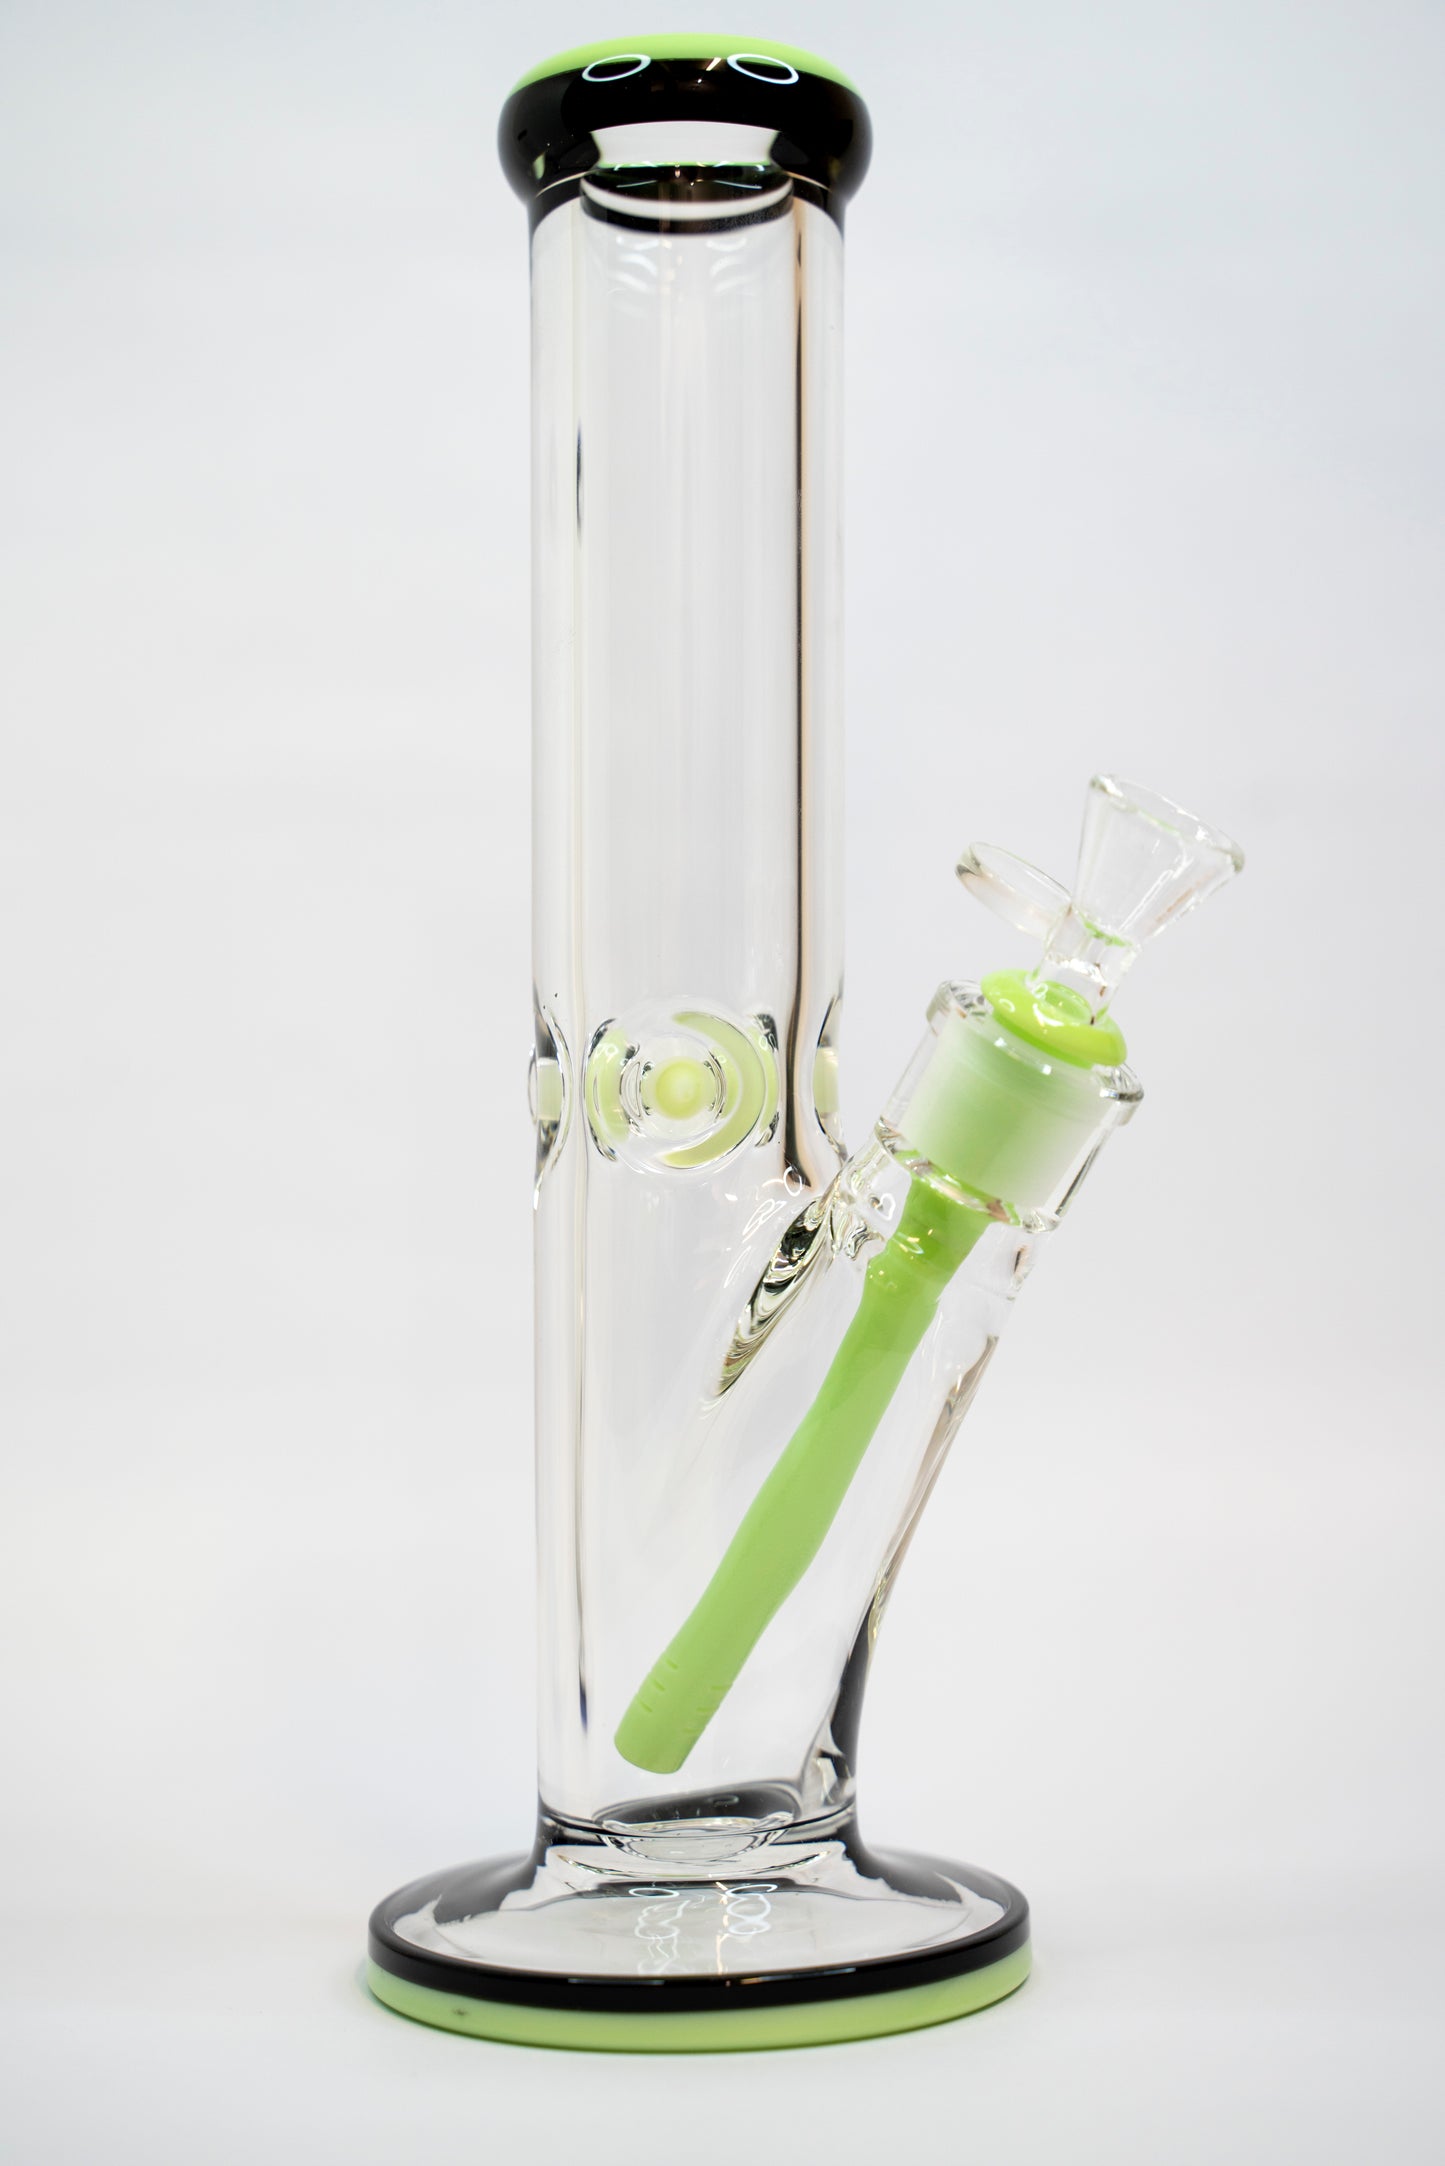 30cm Clear Straight Pipe with Coloured Mouthpiece and Diffuser